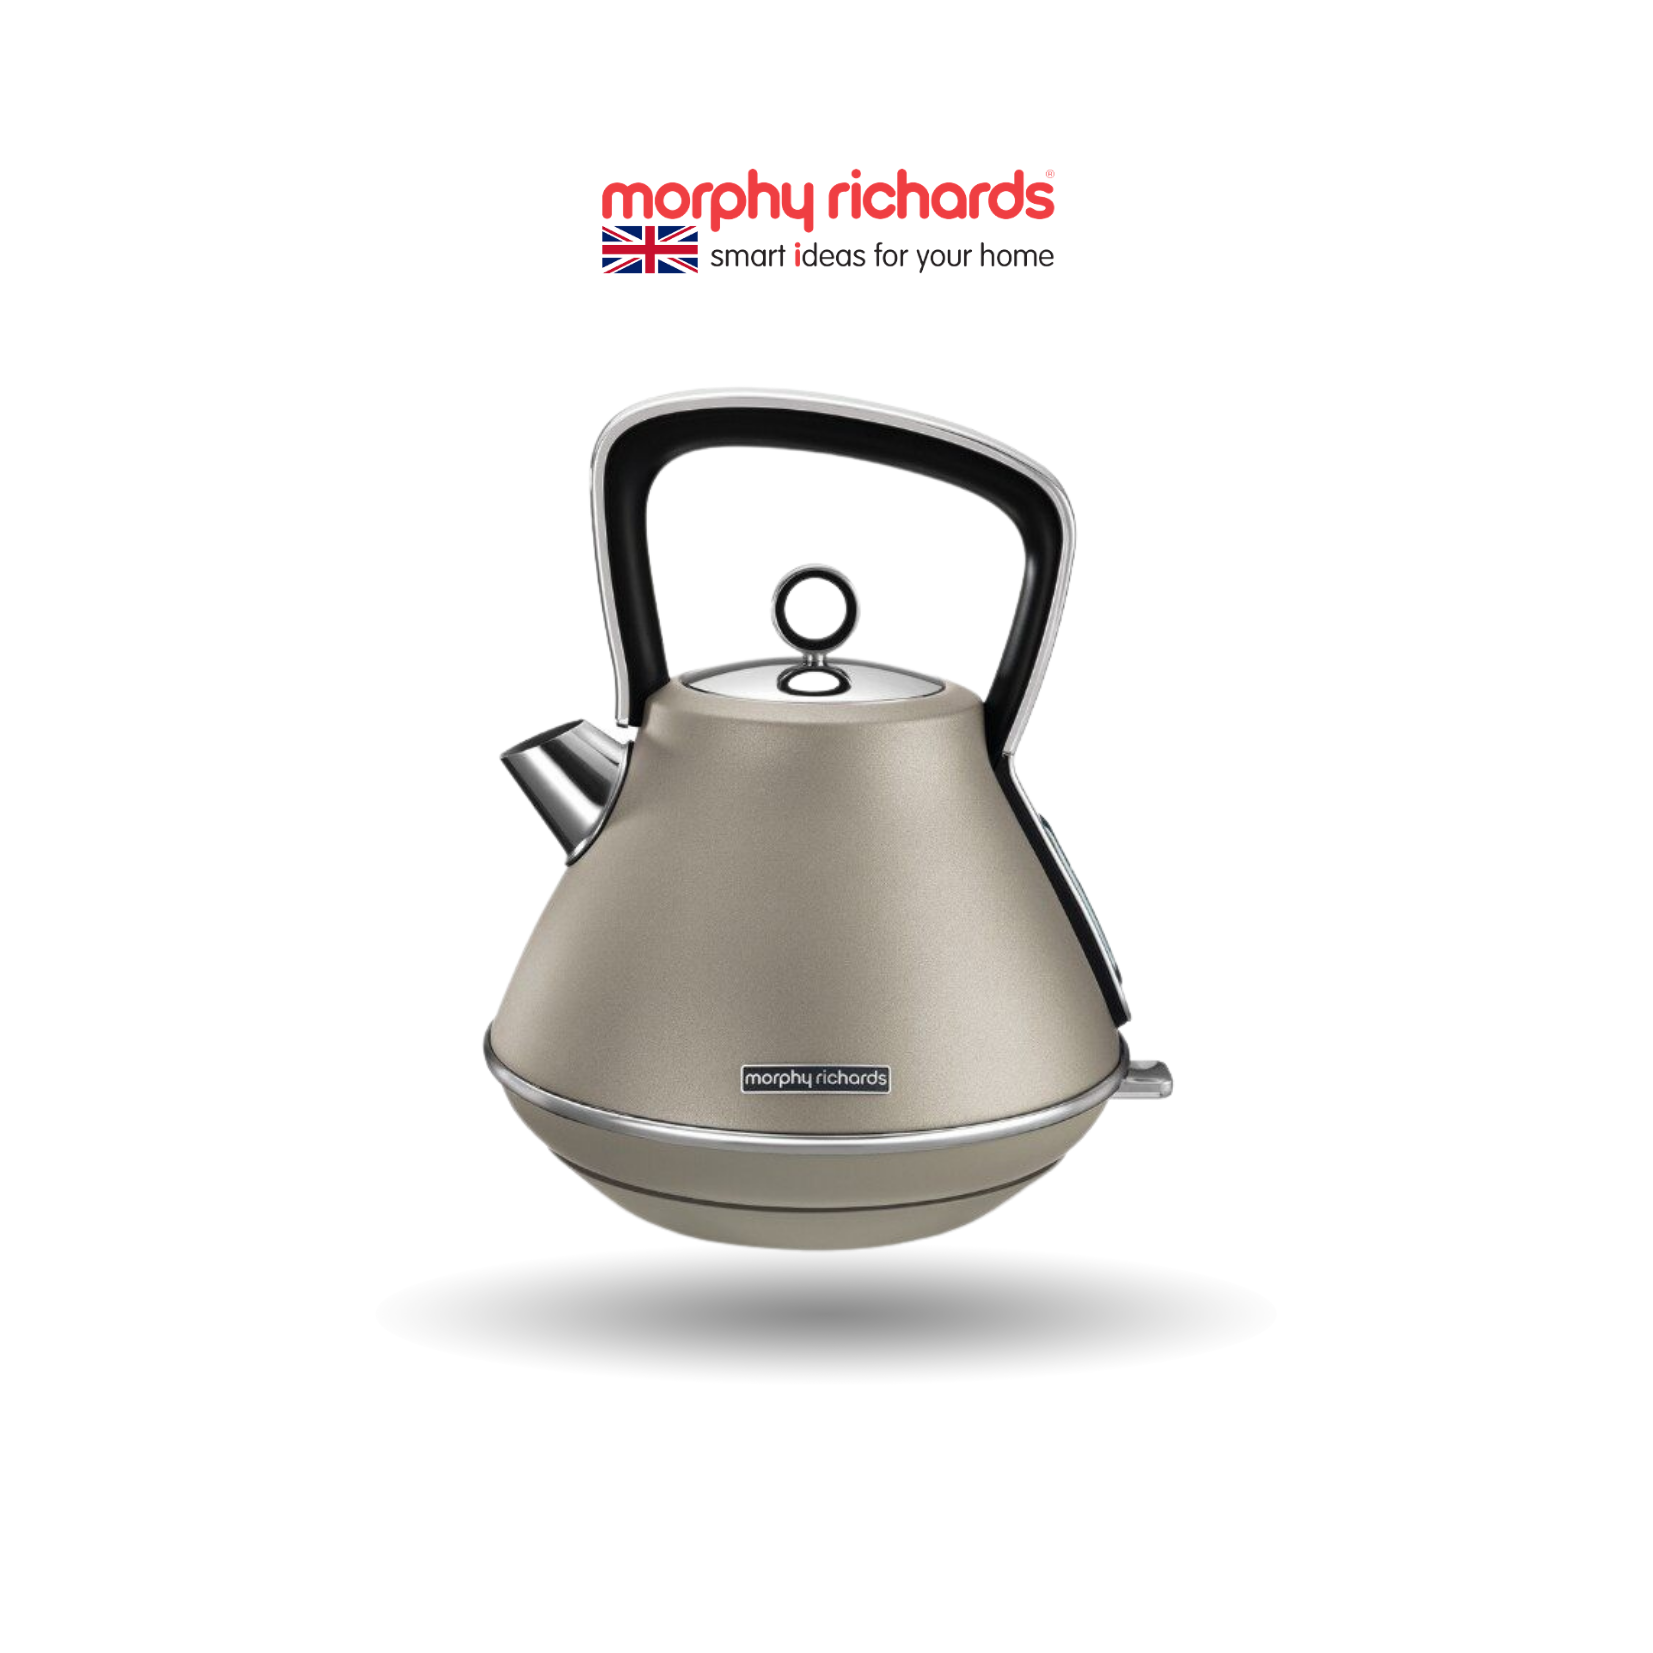 Morphy Richards Accents Pyramid Kettle Platinum - 1.5L Capacity | 3kw Power | 360 Degree Cordless Base